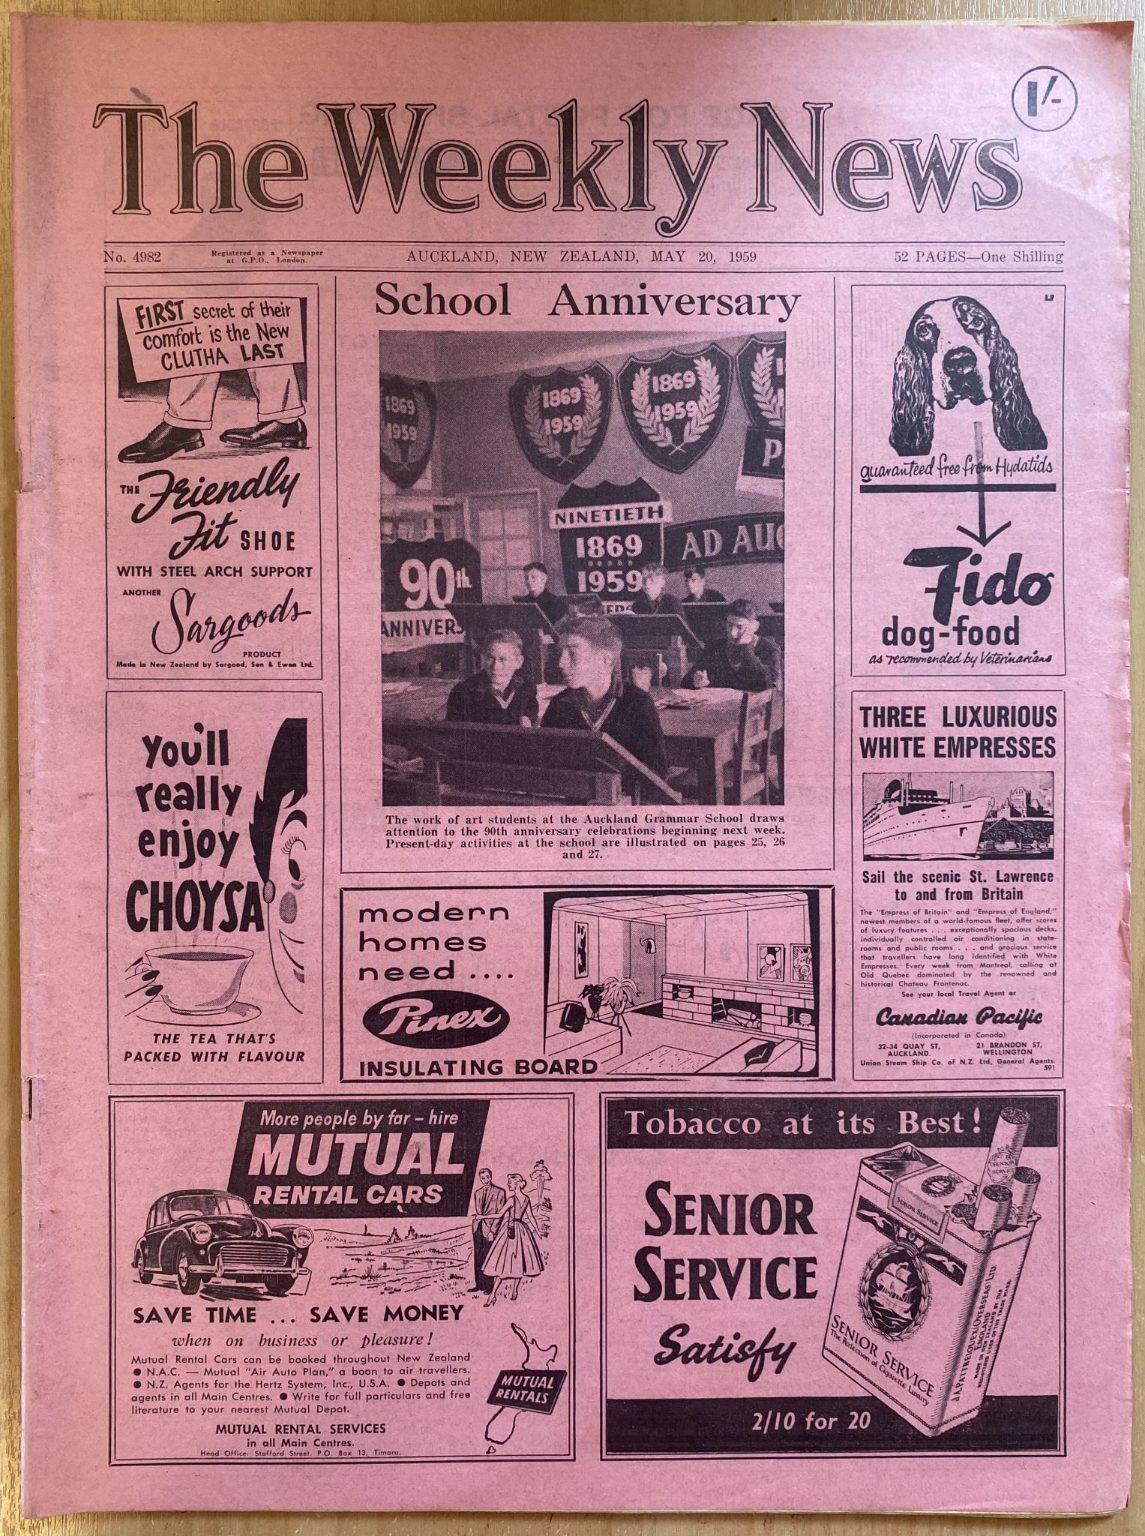 OLD NEWSPAPER: The Weekly News - No. 4982, 20 May 1959